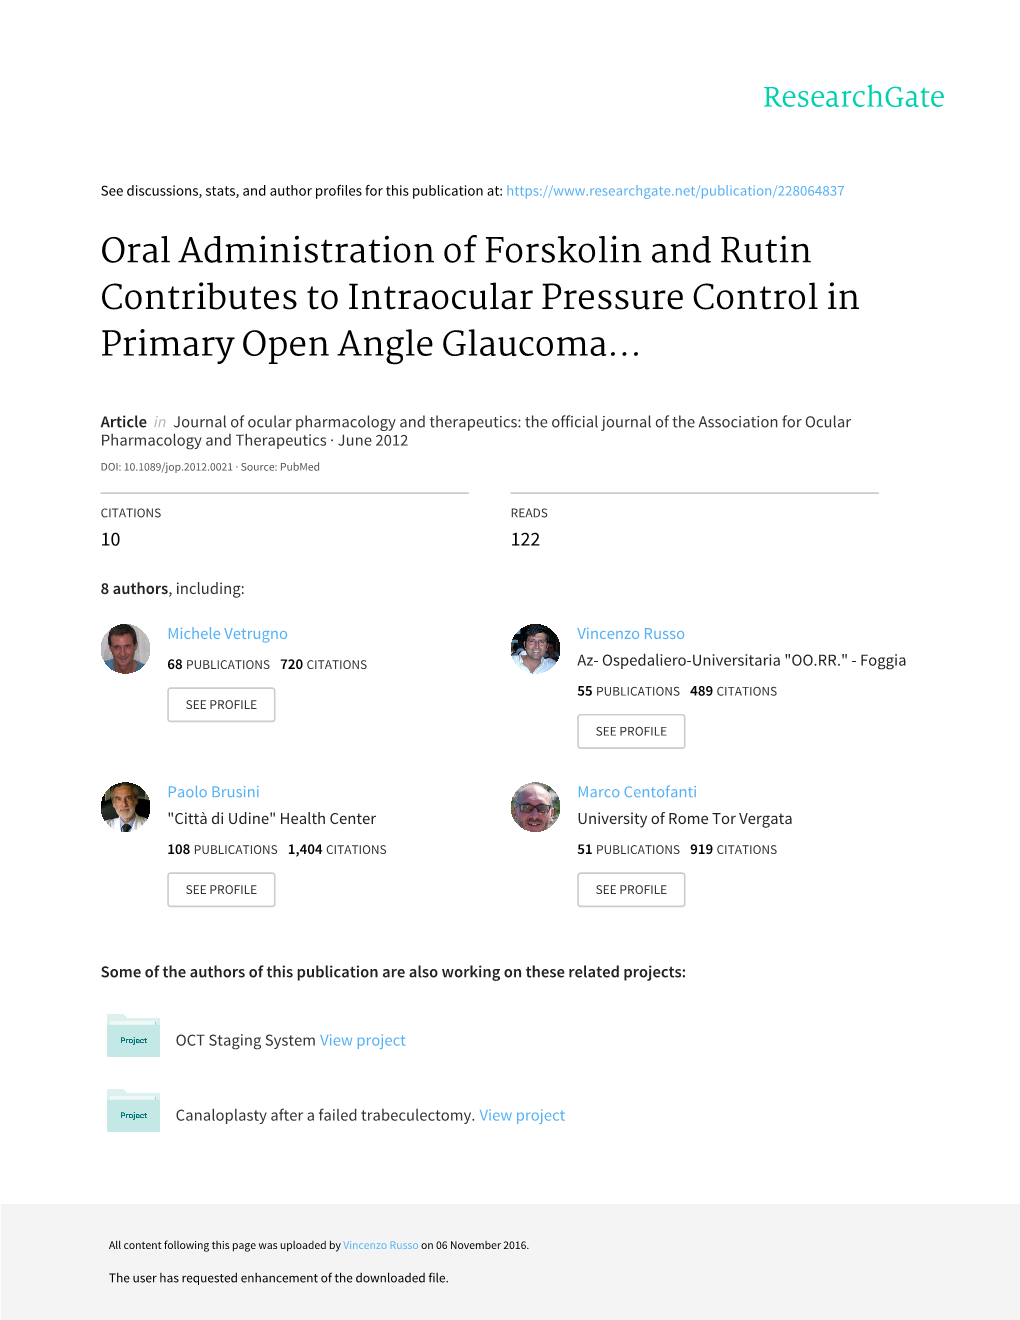 Oral Administration of Forskolin and Rutin Contributes to Intraocular Pressure Control in Primary Open Angle Glaucoma Patients Under Maximum Tolerated Medical Therapy